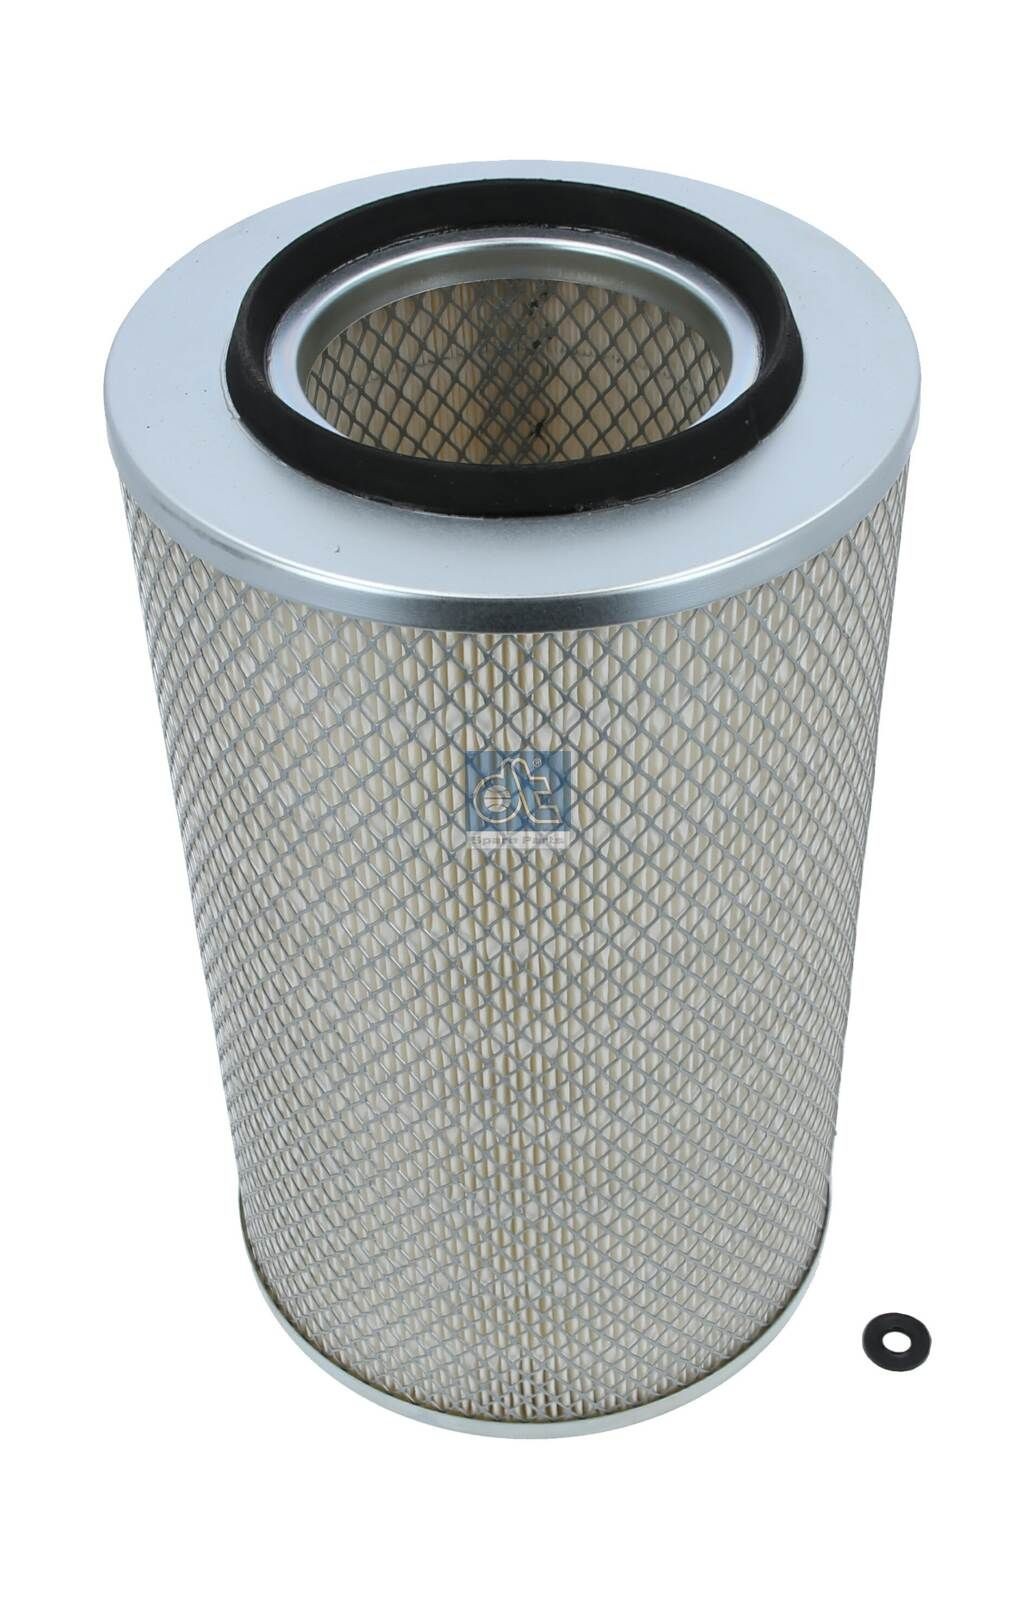 C 23 440/1 DT Spare Parts 380mm, 226mm, Filter Insert Height: 380mm Engine air filter 6.25006 buy